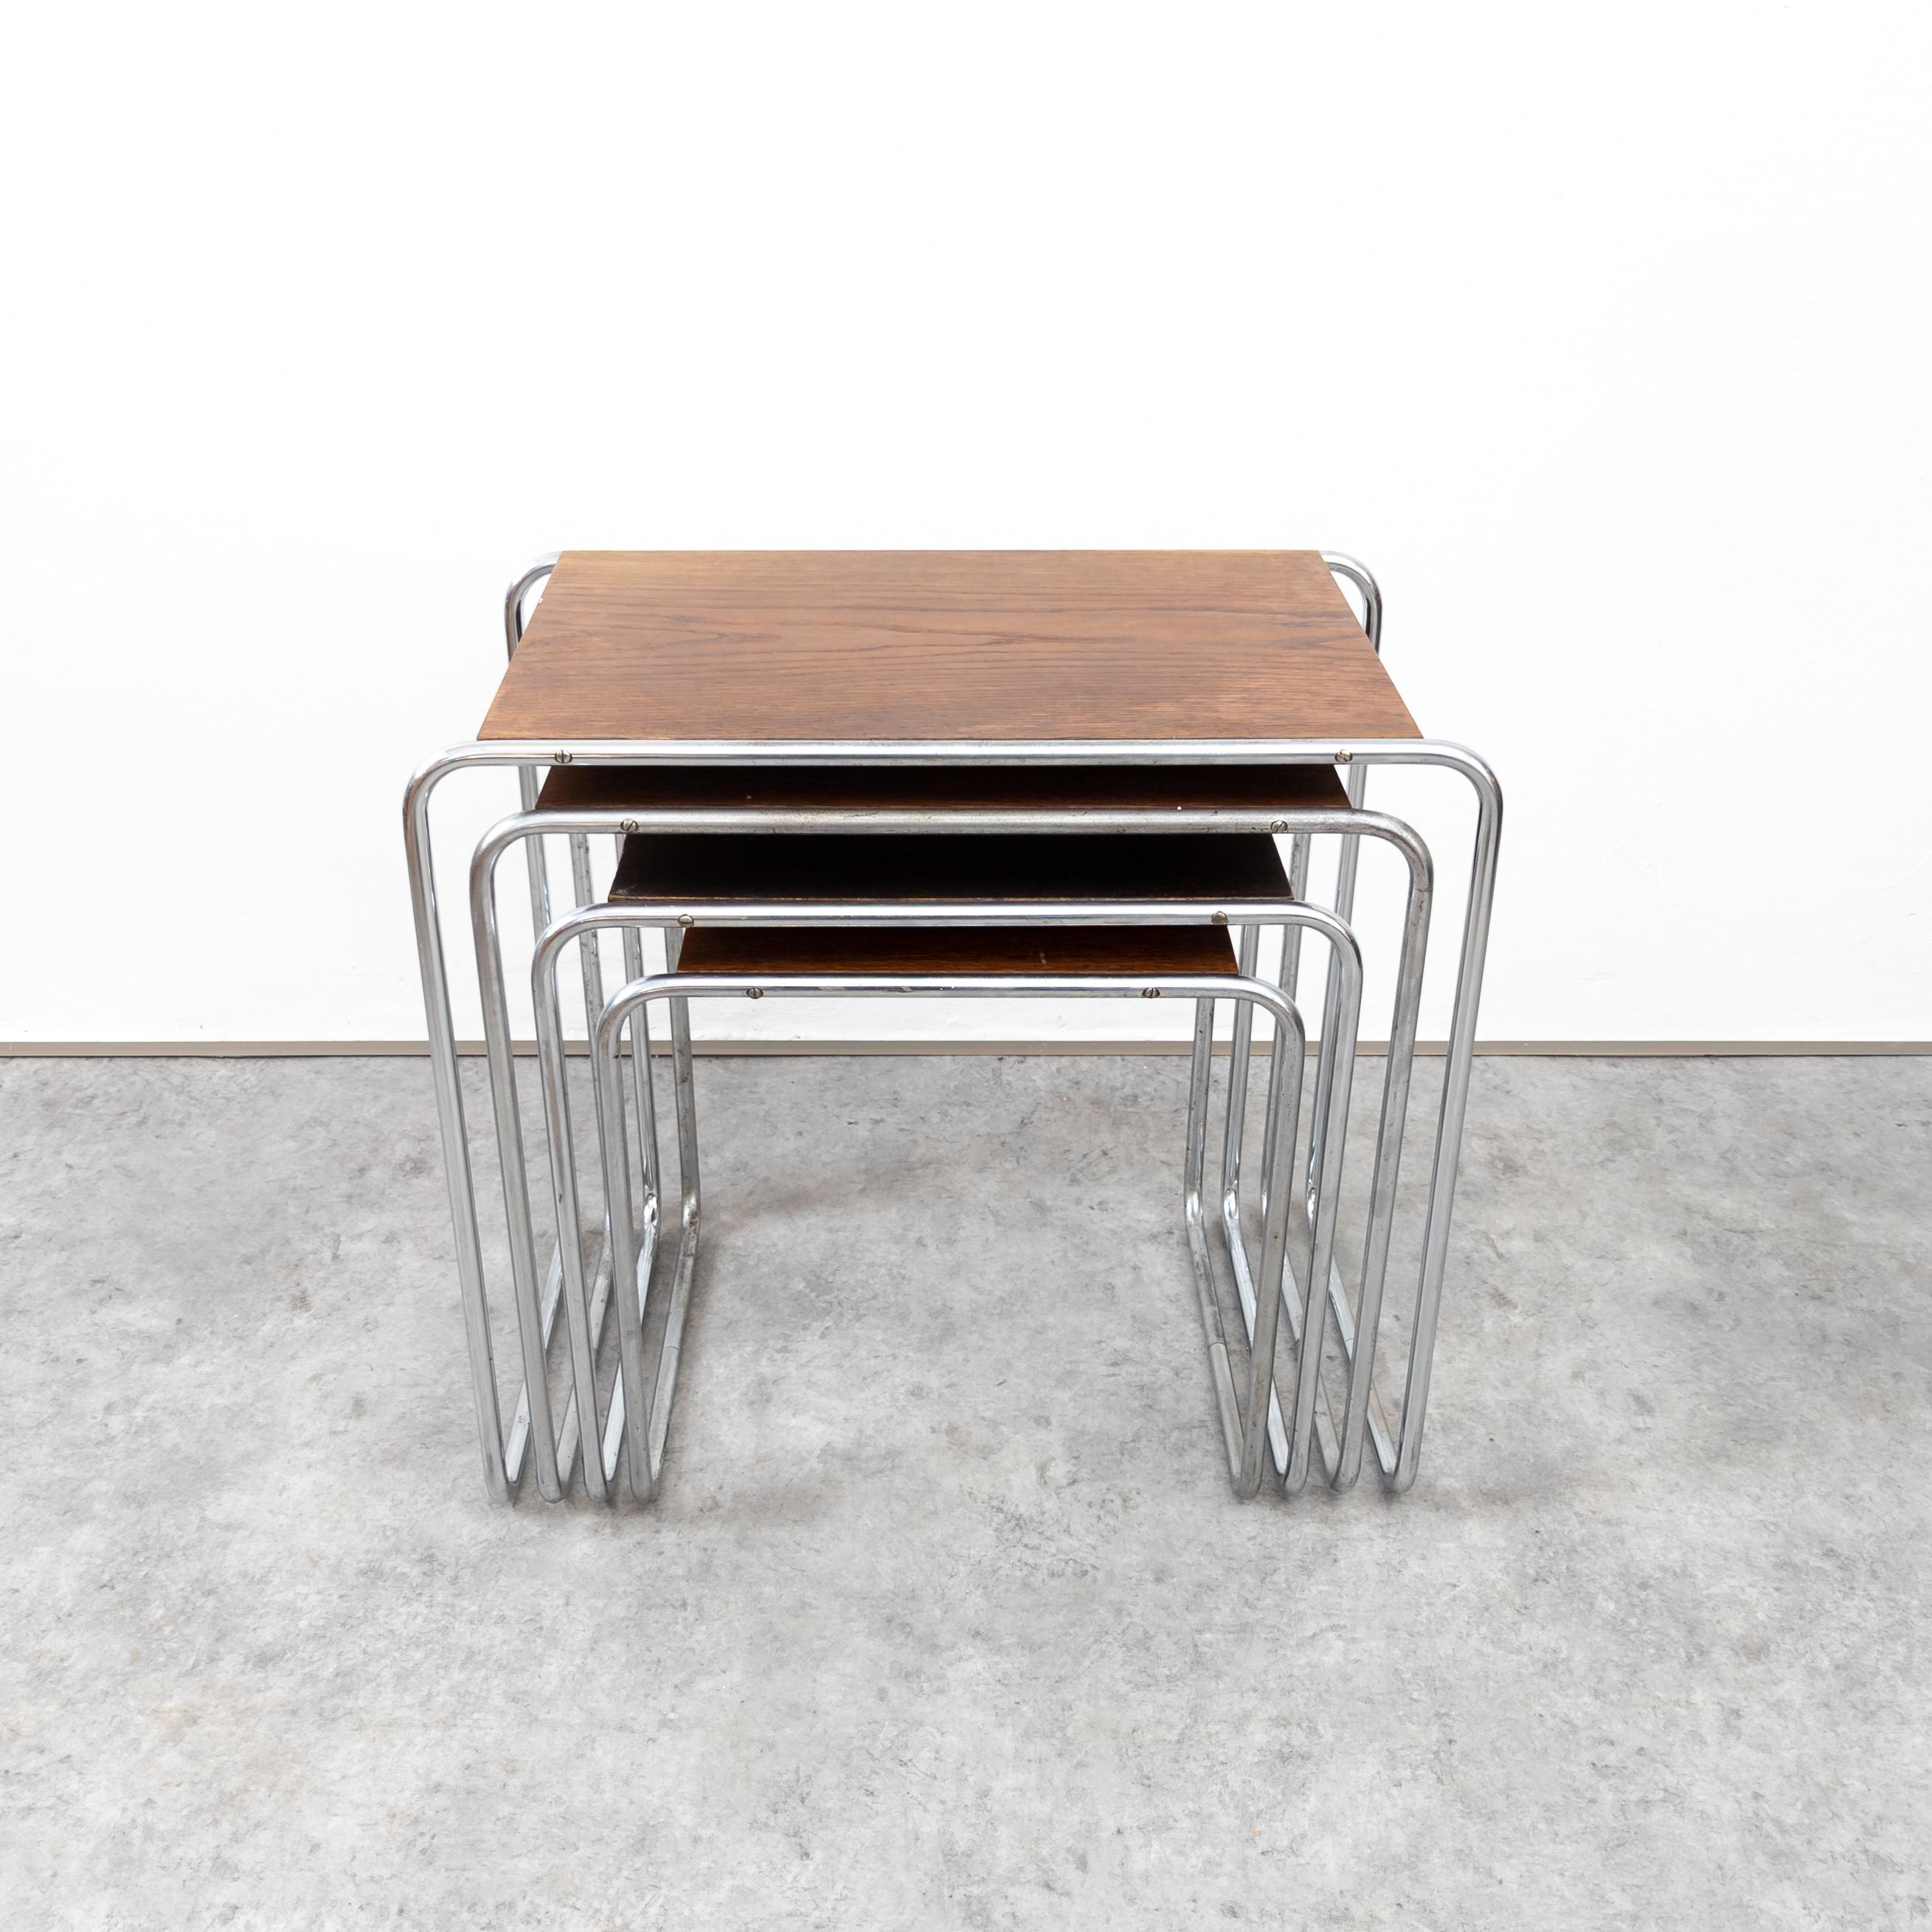 Early Thonet B 9 Nesting Tables by Marcel Breuer For Sale 1